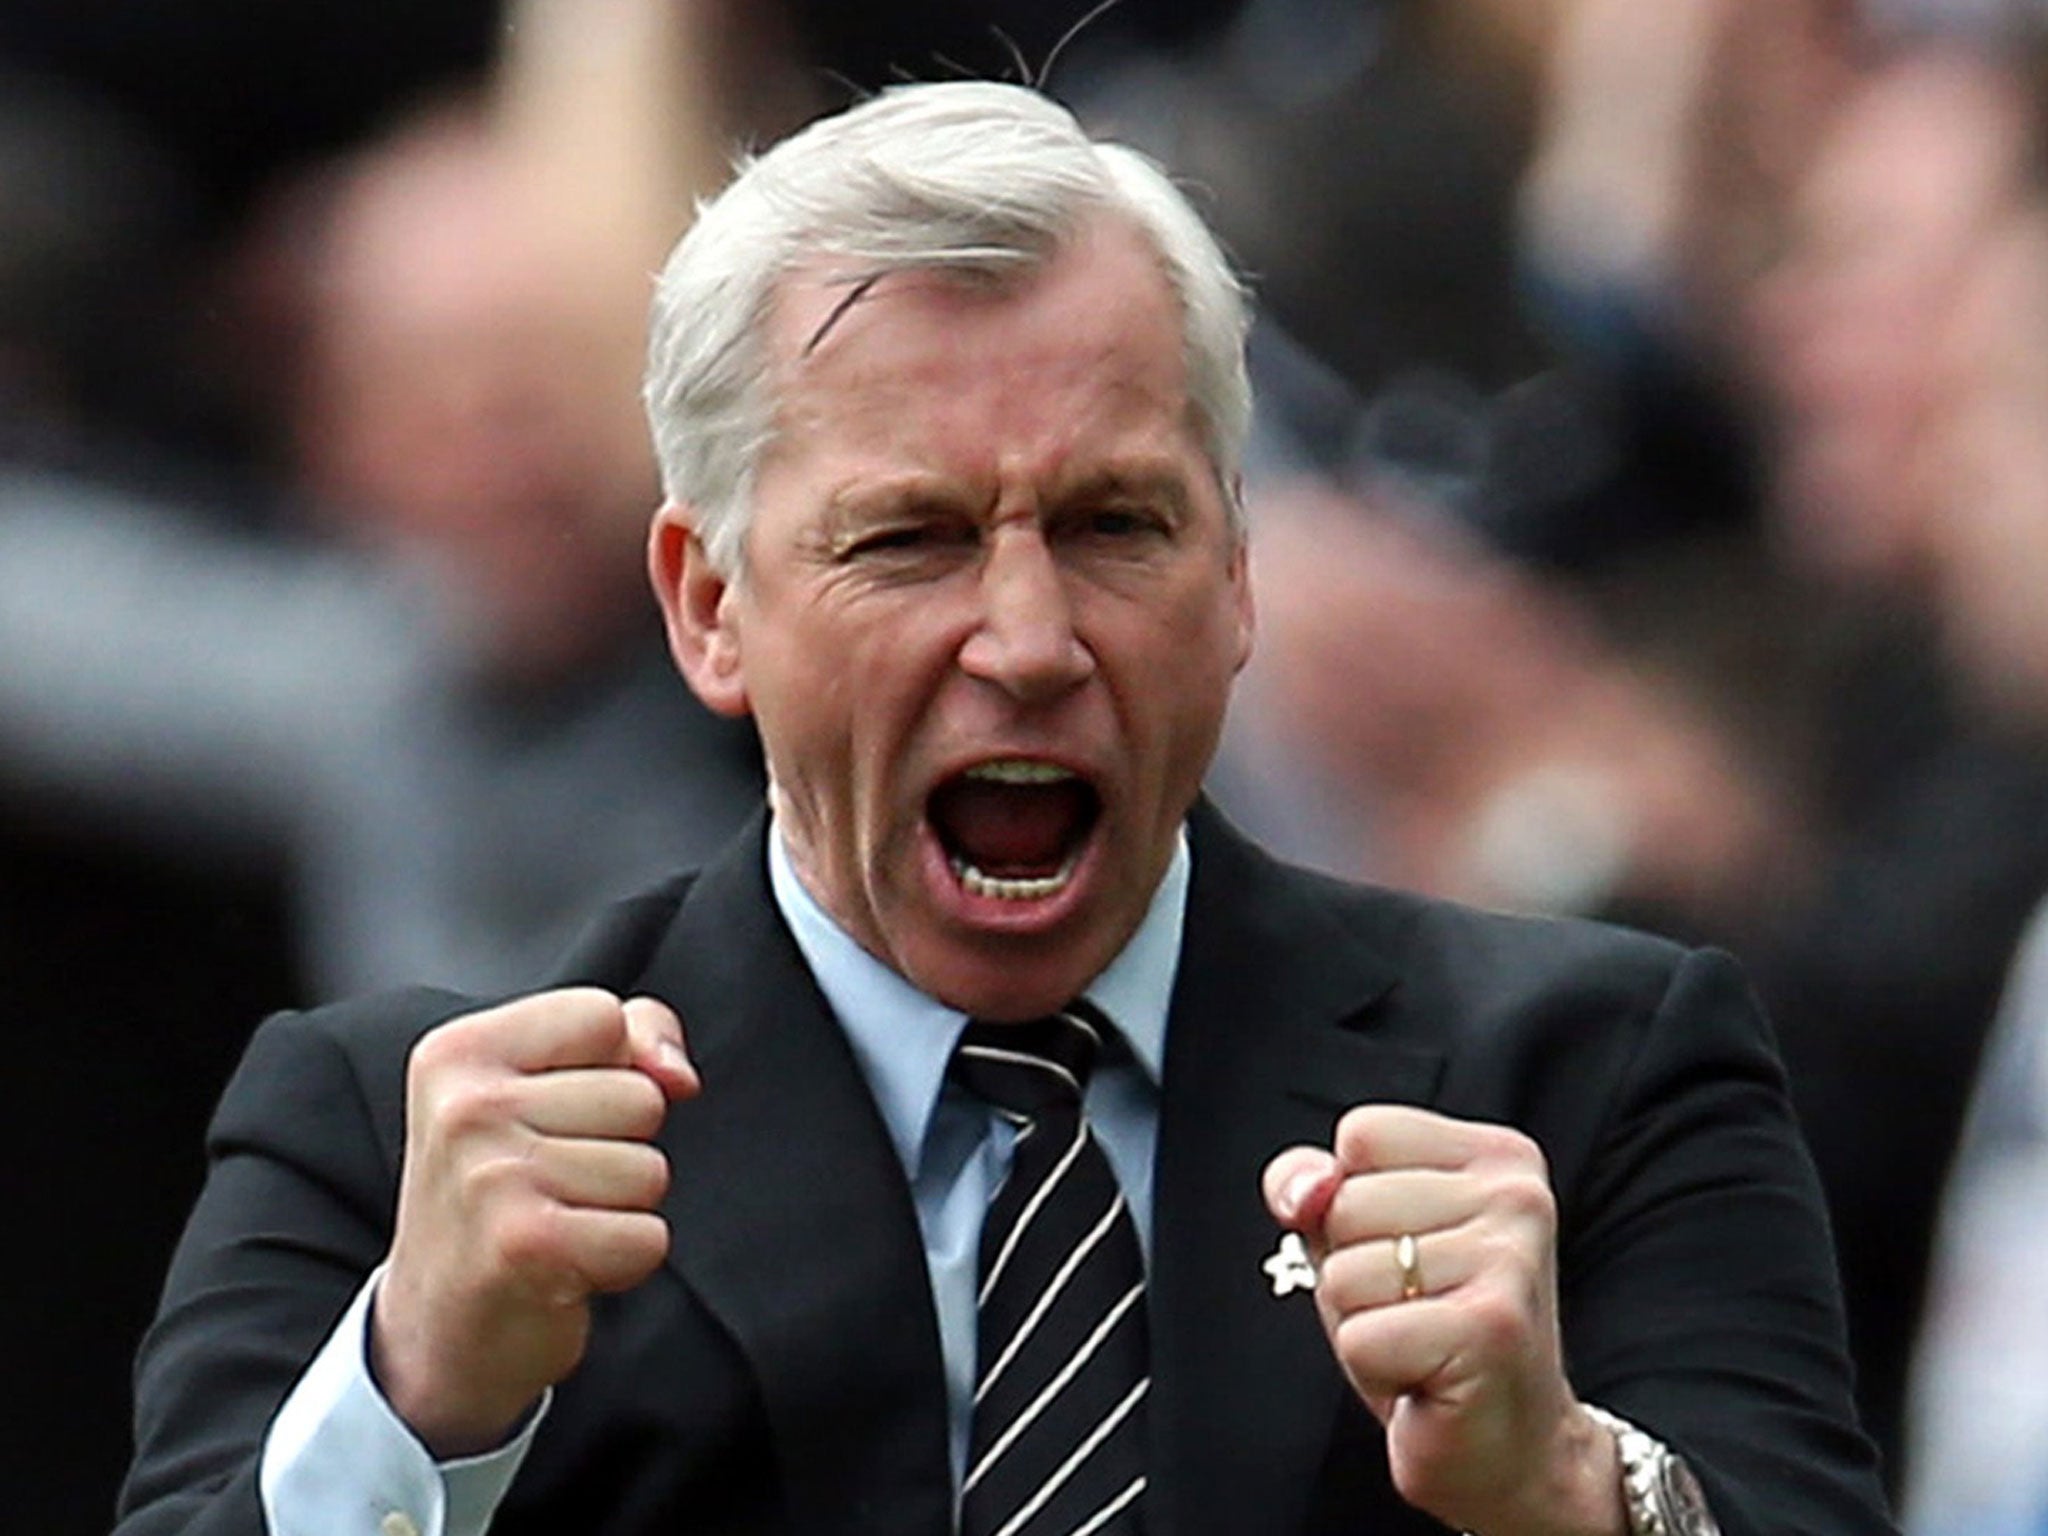 Alan Pardew: 'I'm my own man and will manage this club to best of my ability'